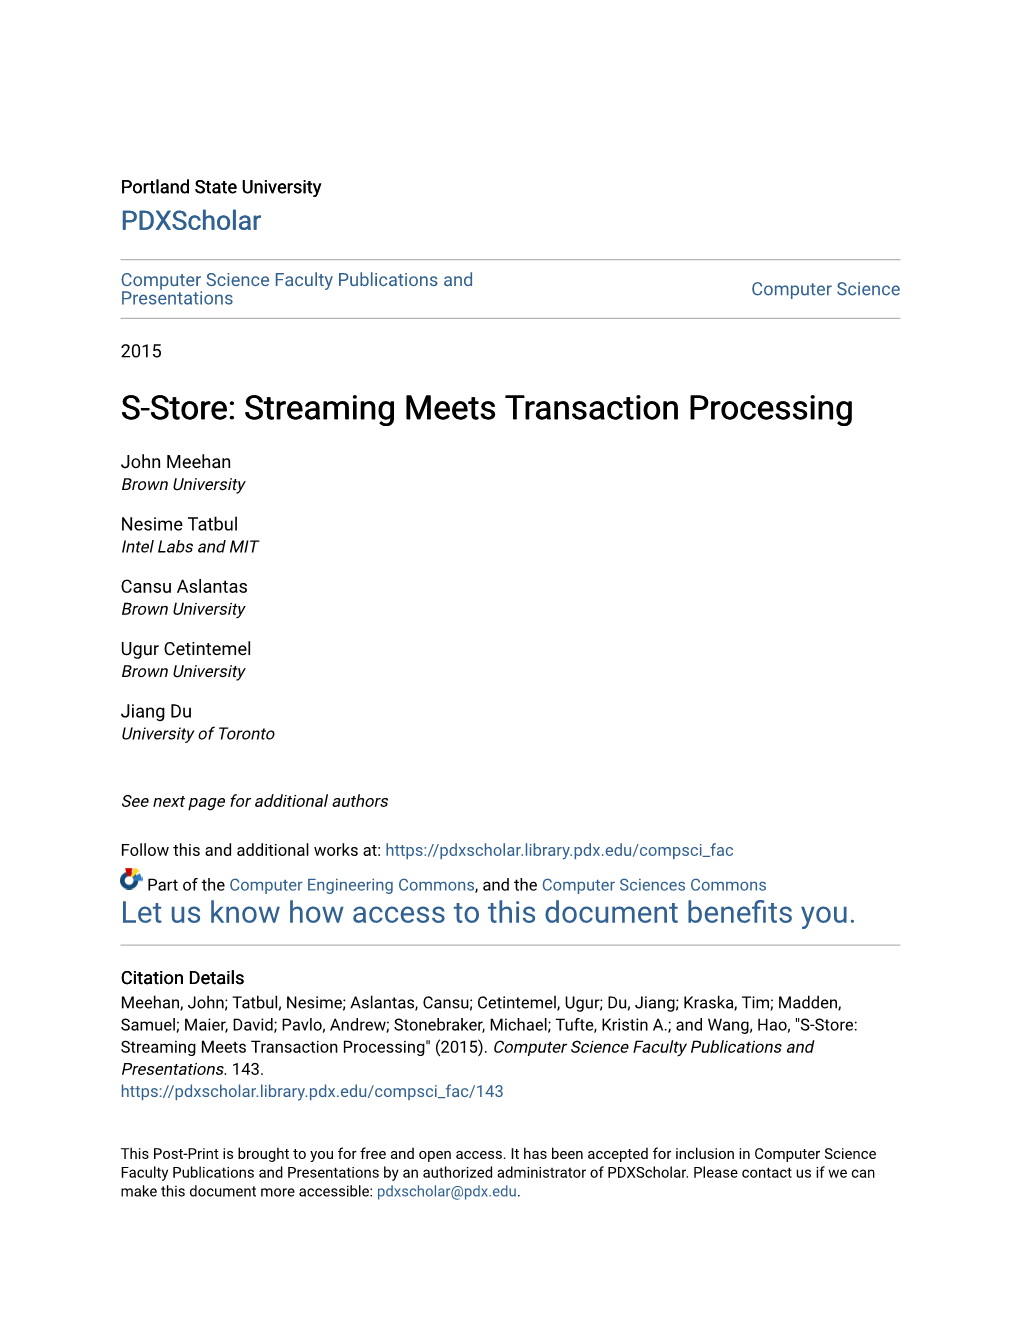 Streaming Meets Transaction Processing